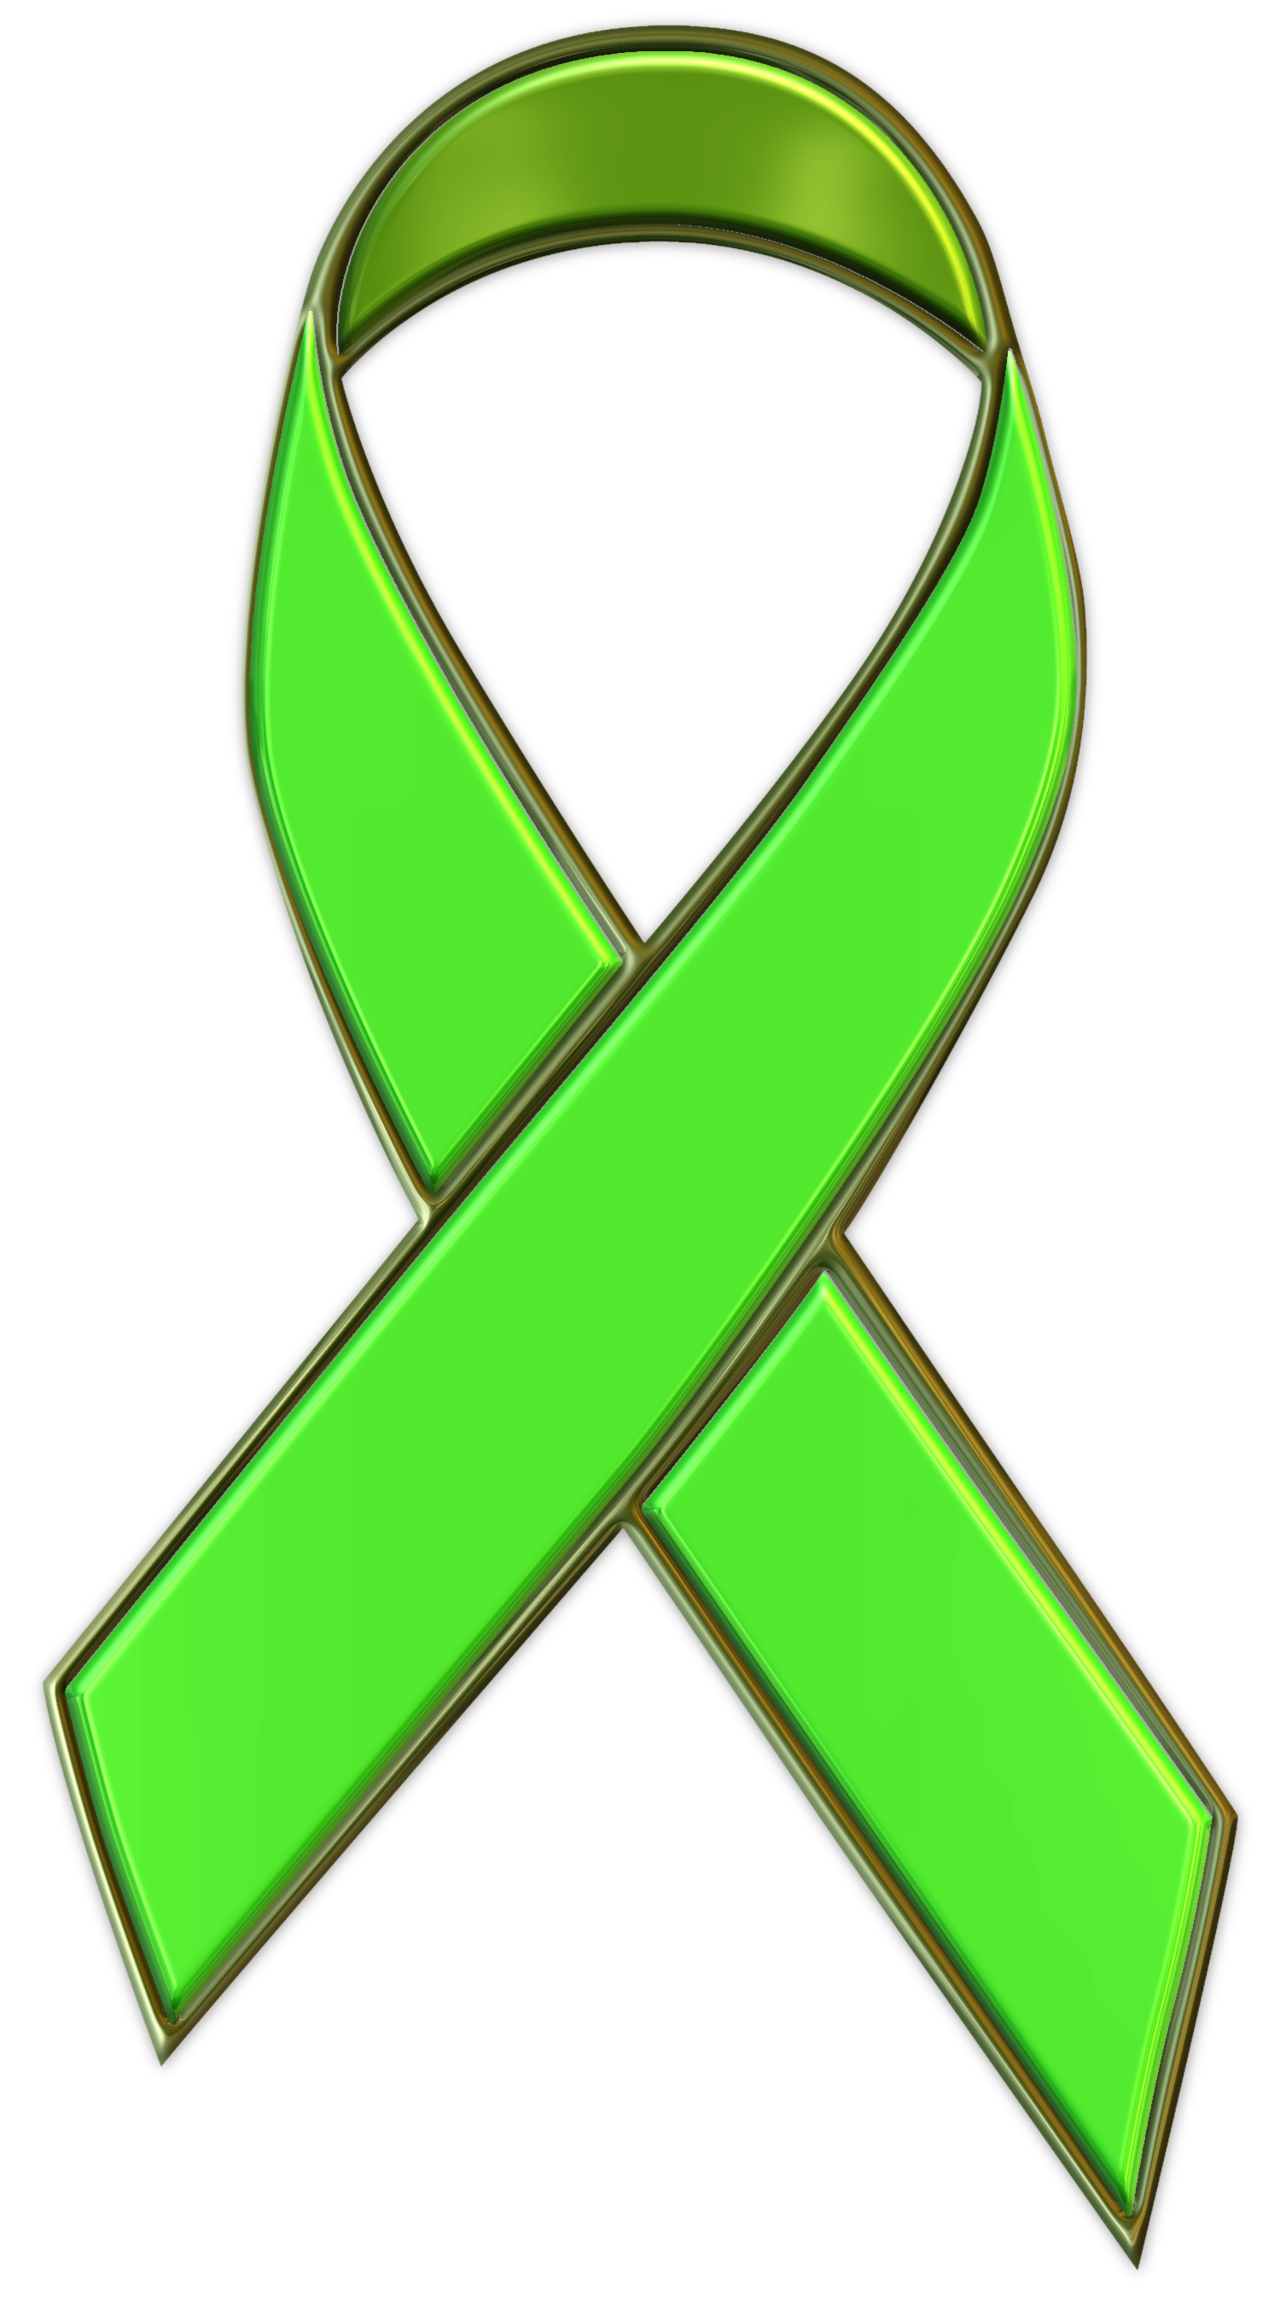 Crazy clipart mental illness. Picture of lime green